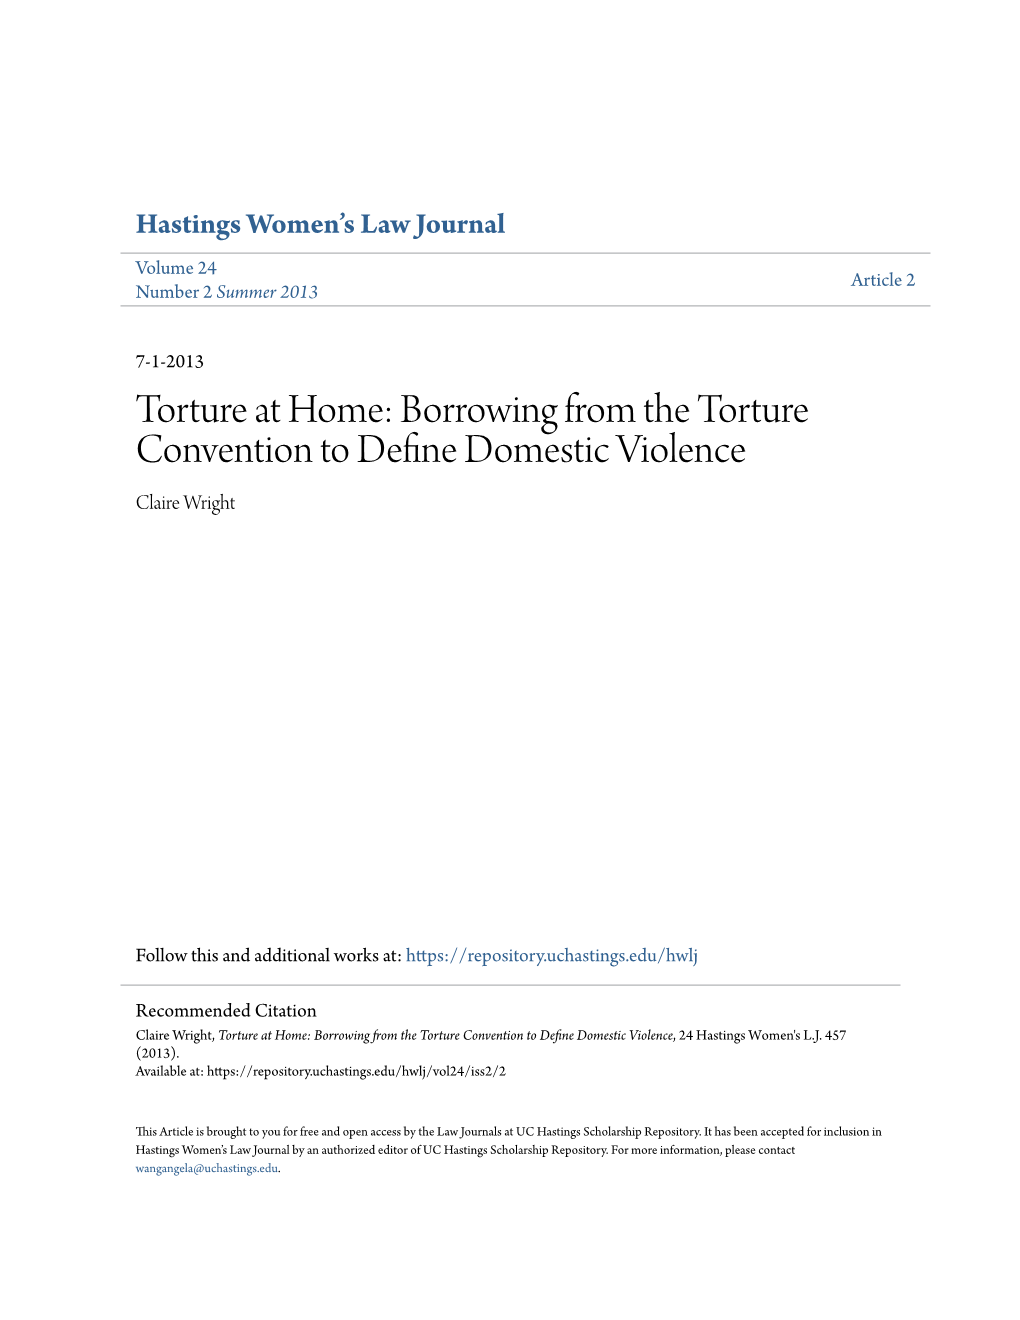 Torture at Home: Borrowing from the Torture Convention to Define Domestic Violence, 24 Hastings Women's L.J